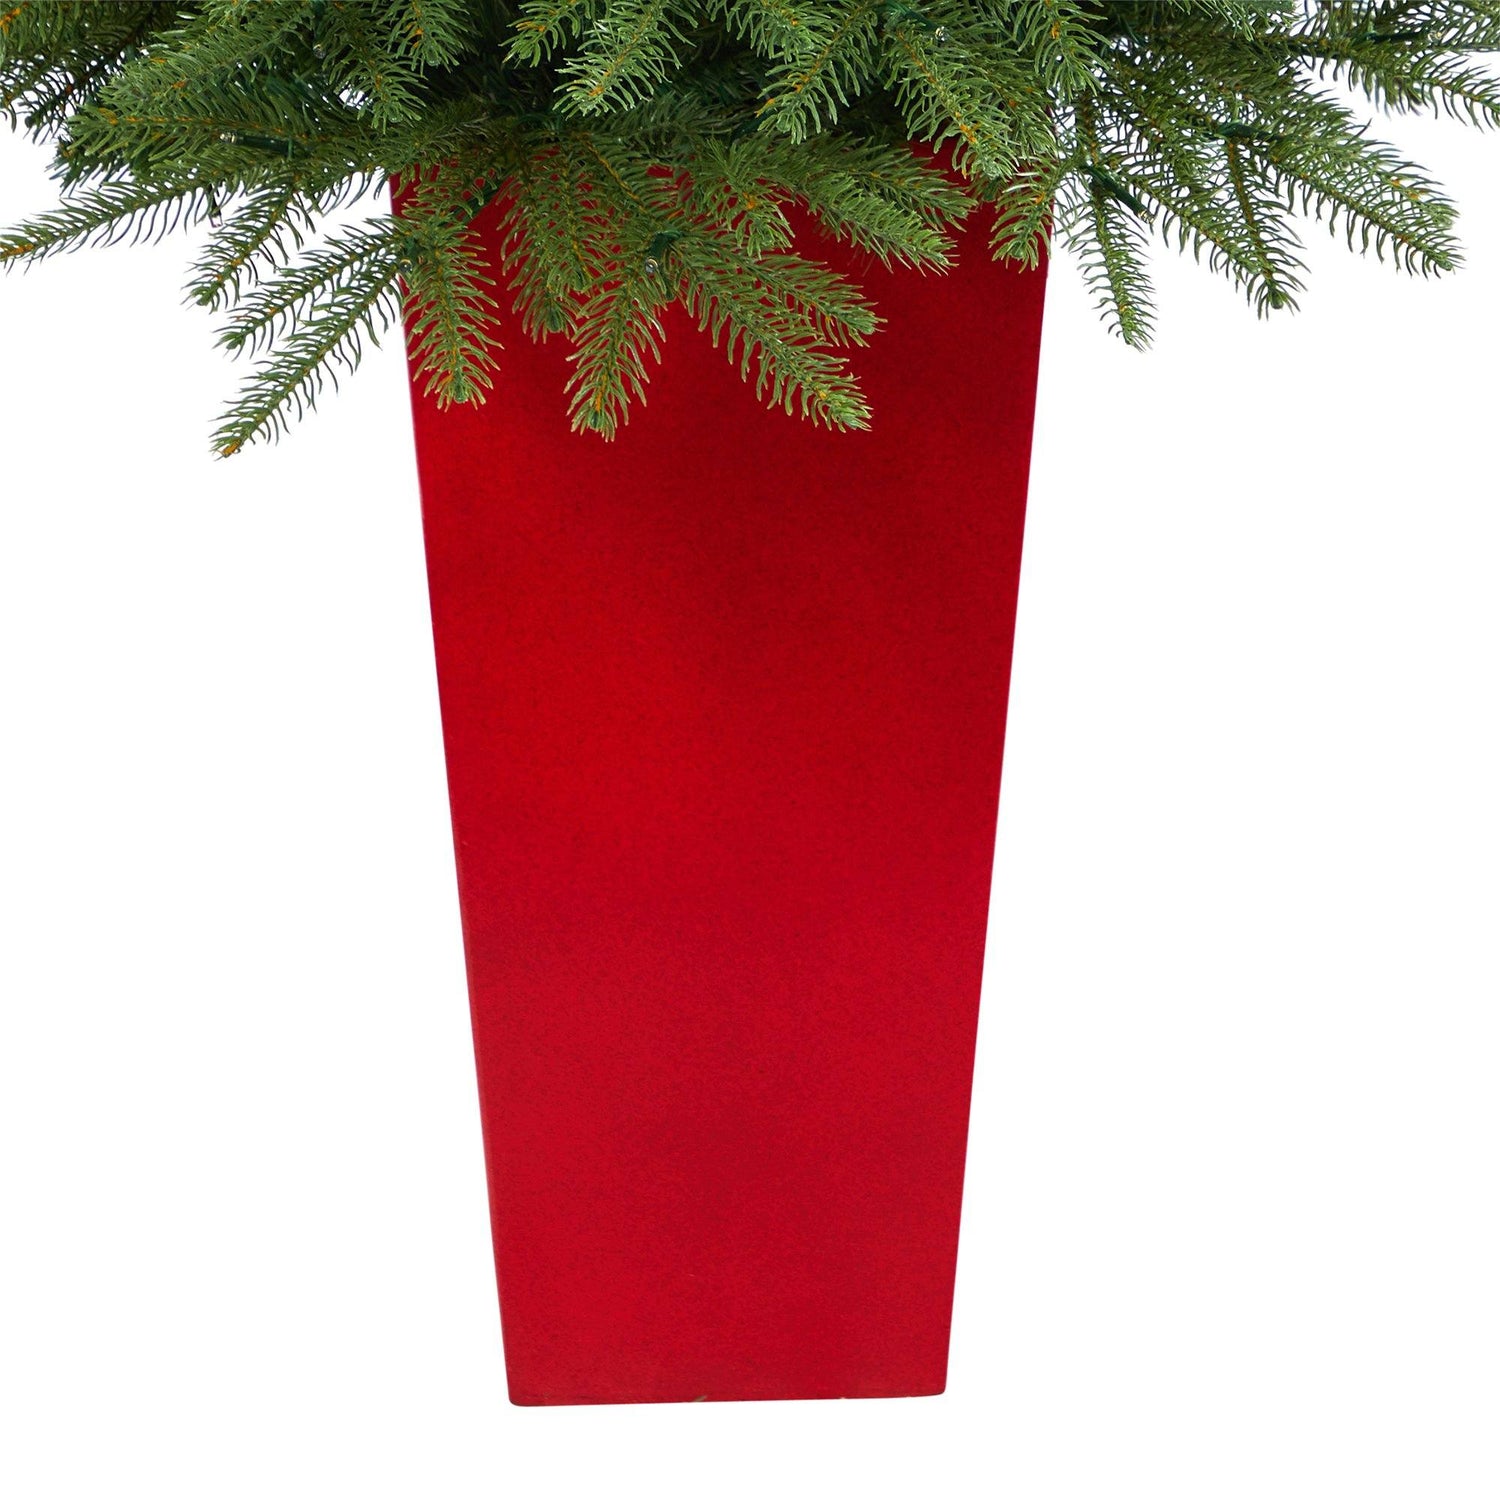 57” Vancouver Fir “Natural Look” Artificial Christmas Tree with 250 Clear LED Lights and 814 Bendable Branches in Red Tower Planter